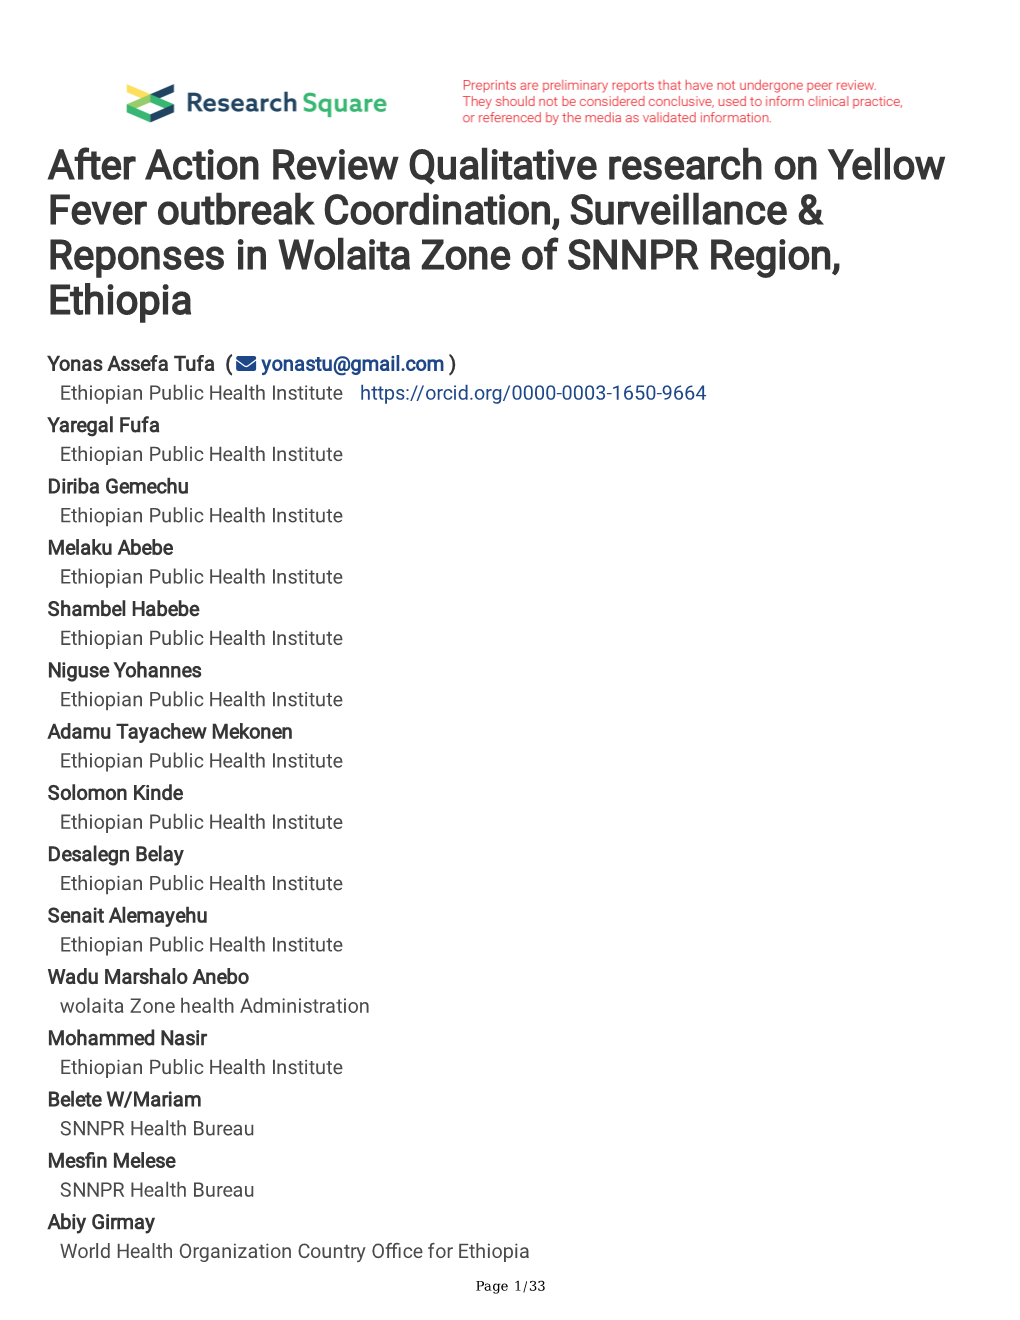 After Action Review Qualitative Research on Yellow Fever Outbreak Coordination, Surveillance & Reponses in Wolaita Zone of SNNPR Region, Ethiopia